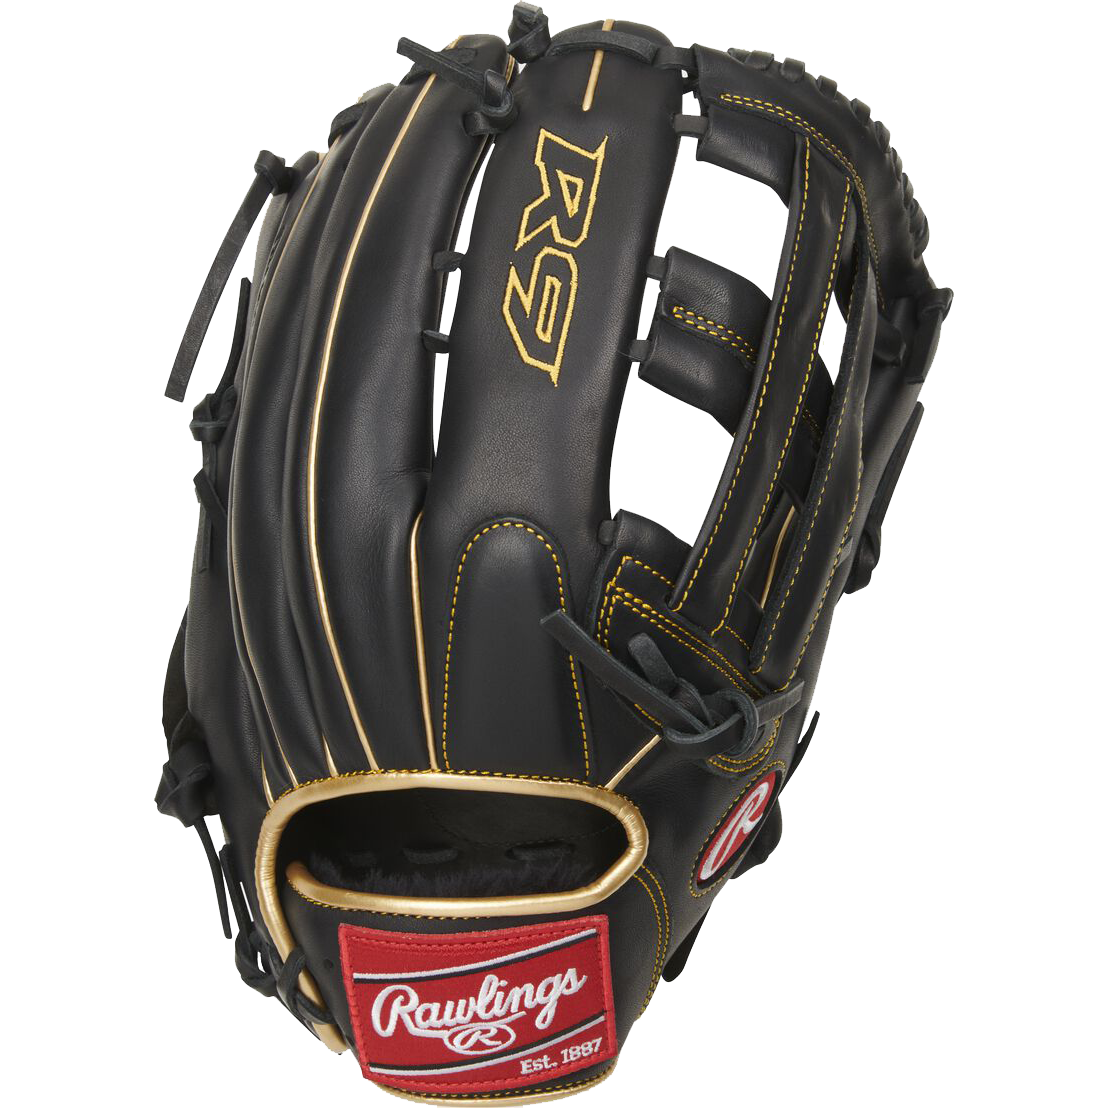  Rawlings Pro Preferred Baseball Glove, 12.75 inch, Pro-H Web,  Left Hand Throw : Sports & Outdoors